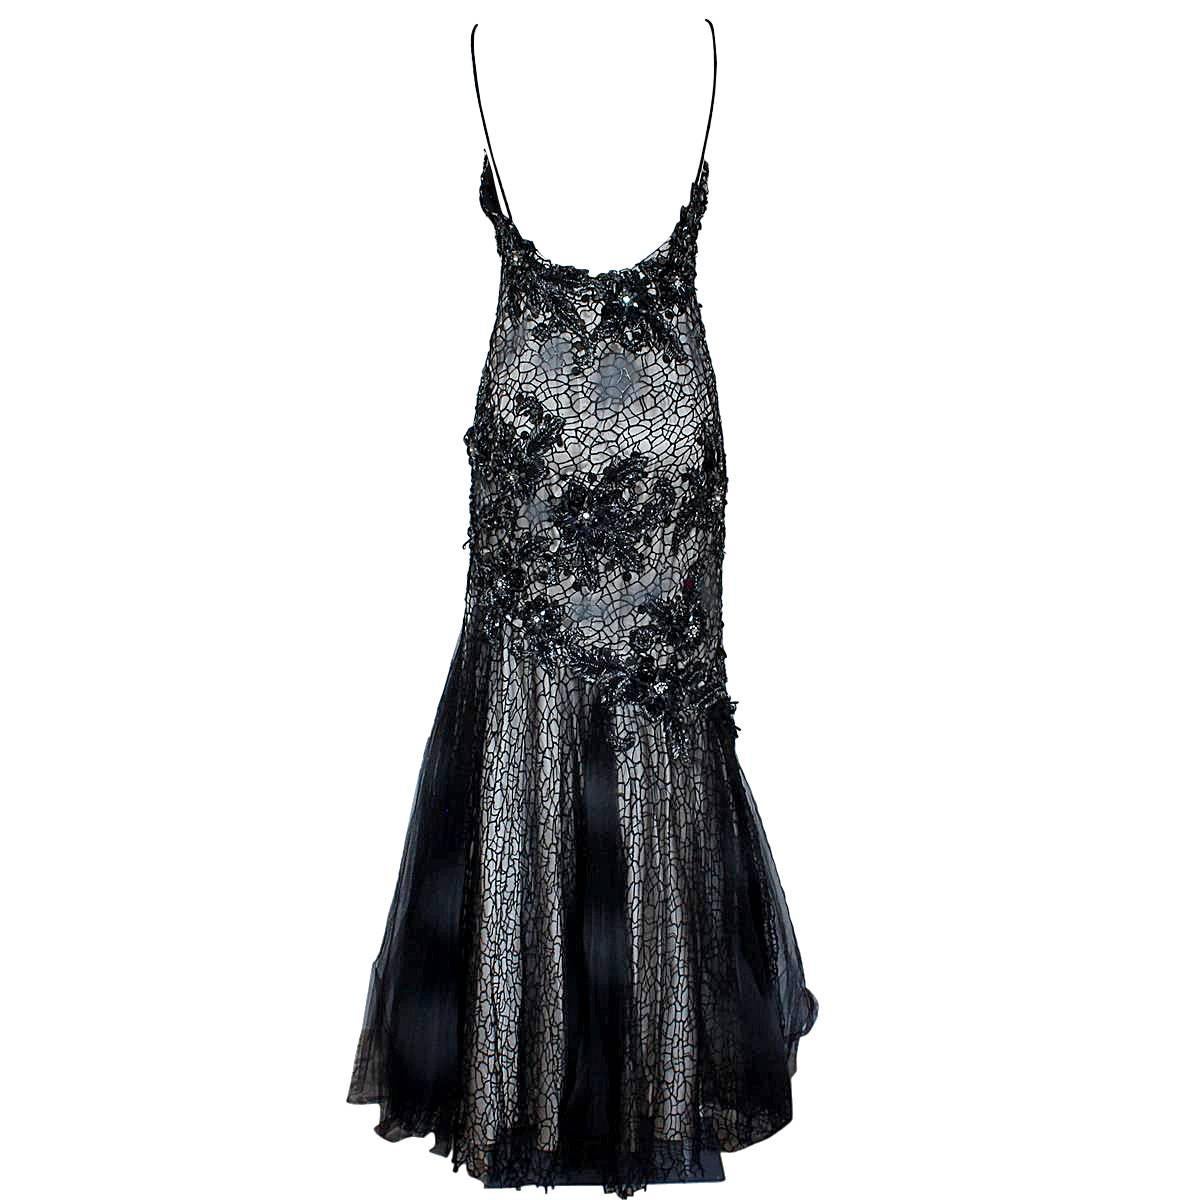 Fantastic dress by Gribha International
Long dress
Amazing work of tulle, net and sequins
Black and grey colors
With undervest
Total lenght cm 125 (49.2 inches)
Made in France
Worldwide express shipping included in the price !